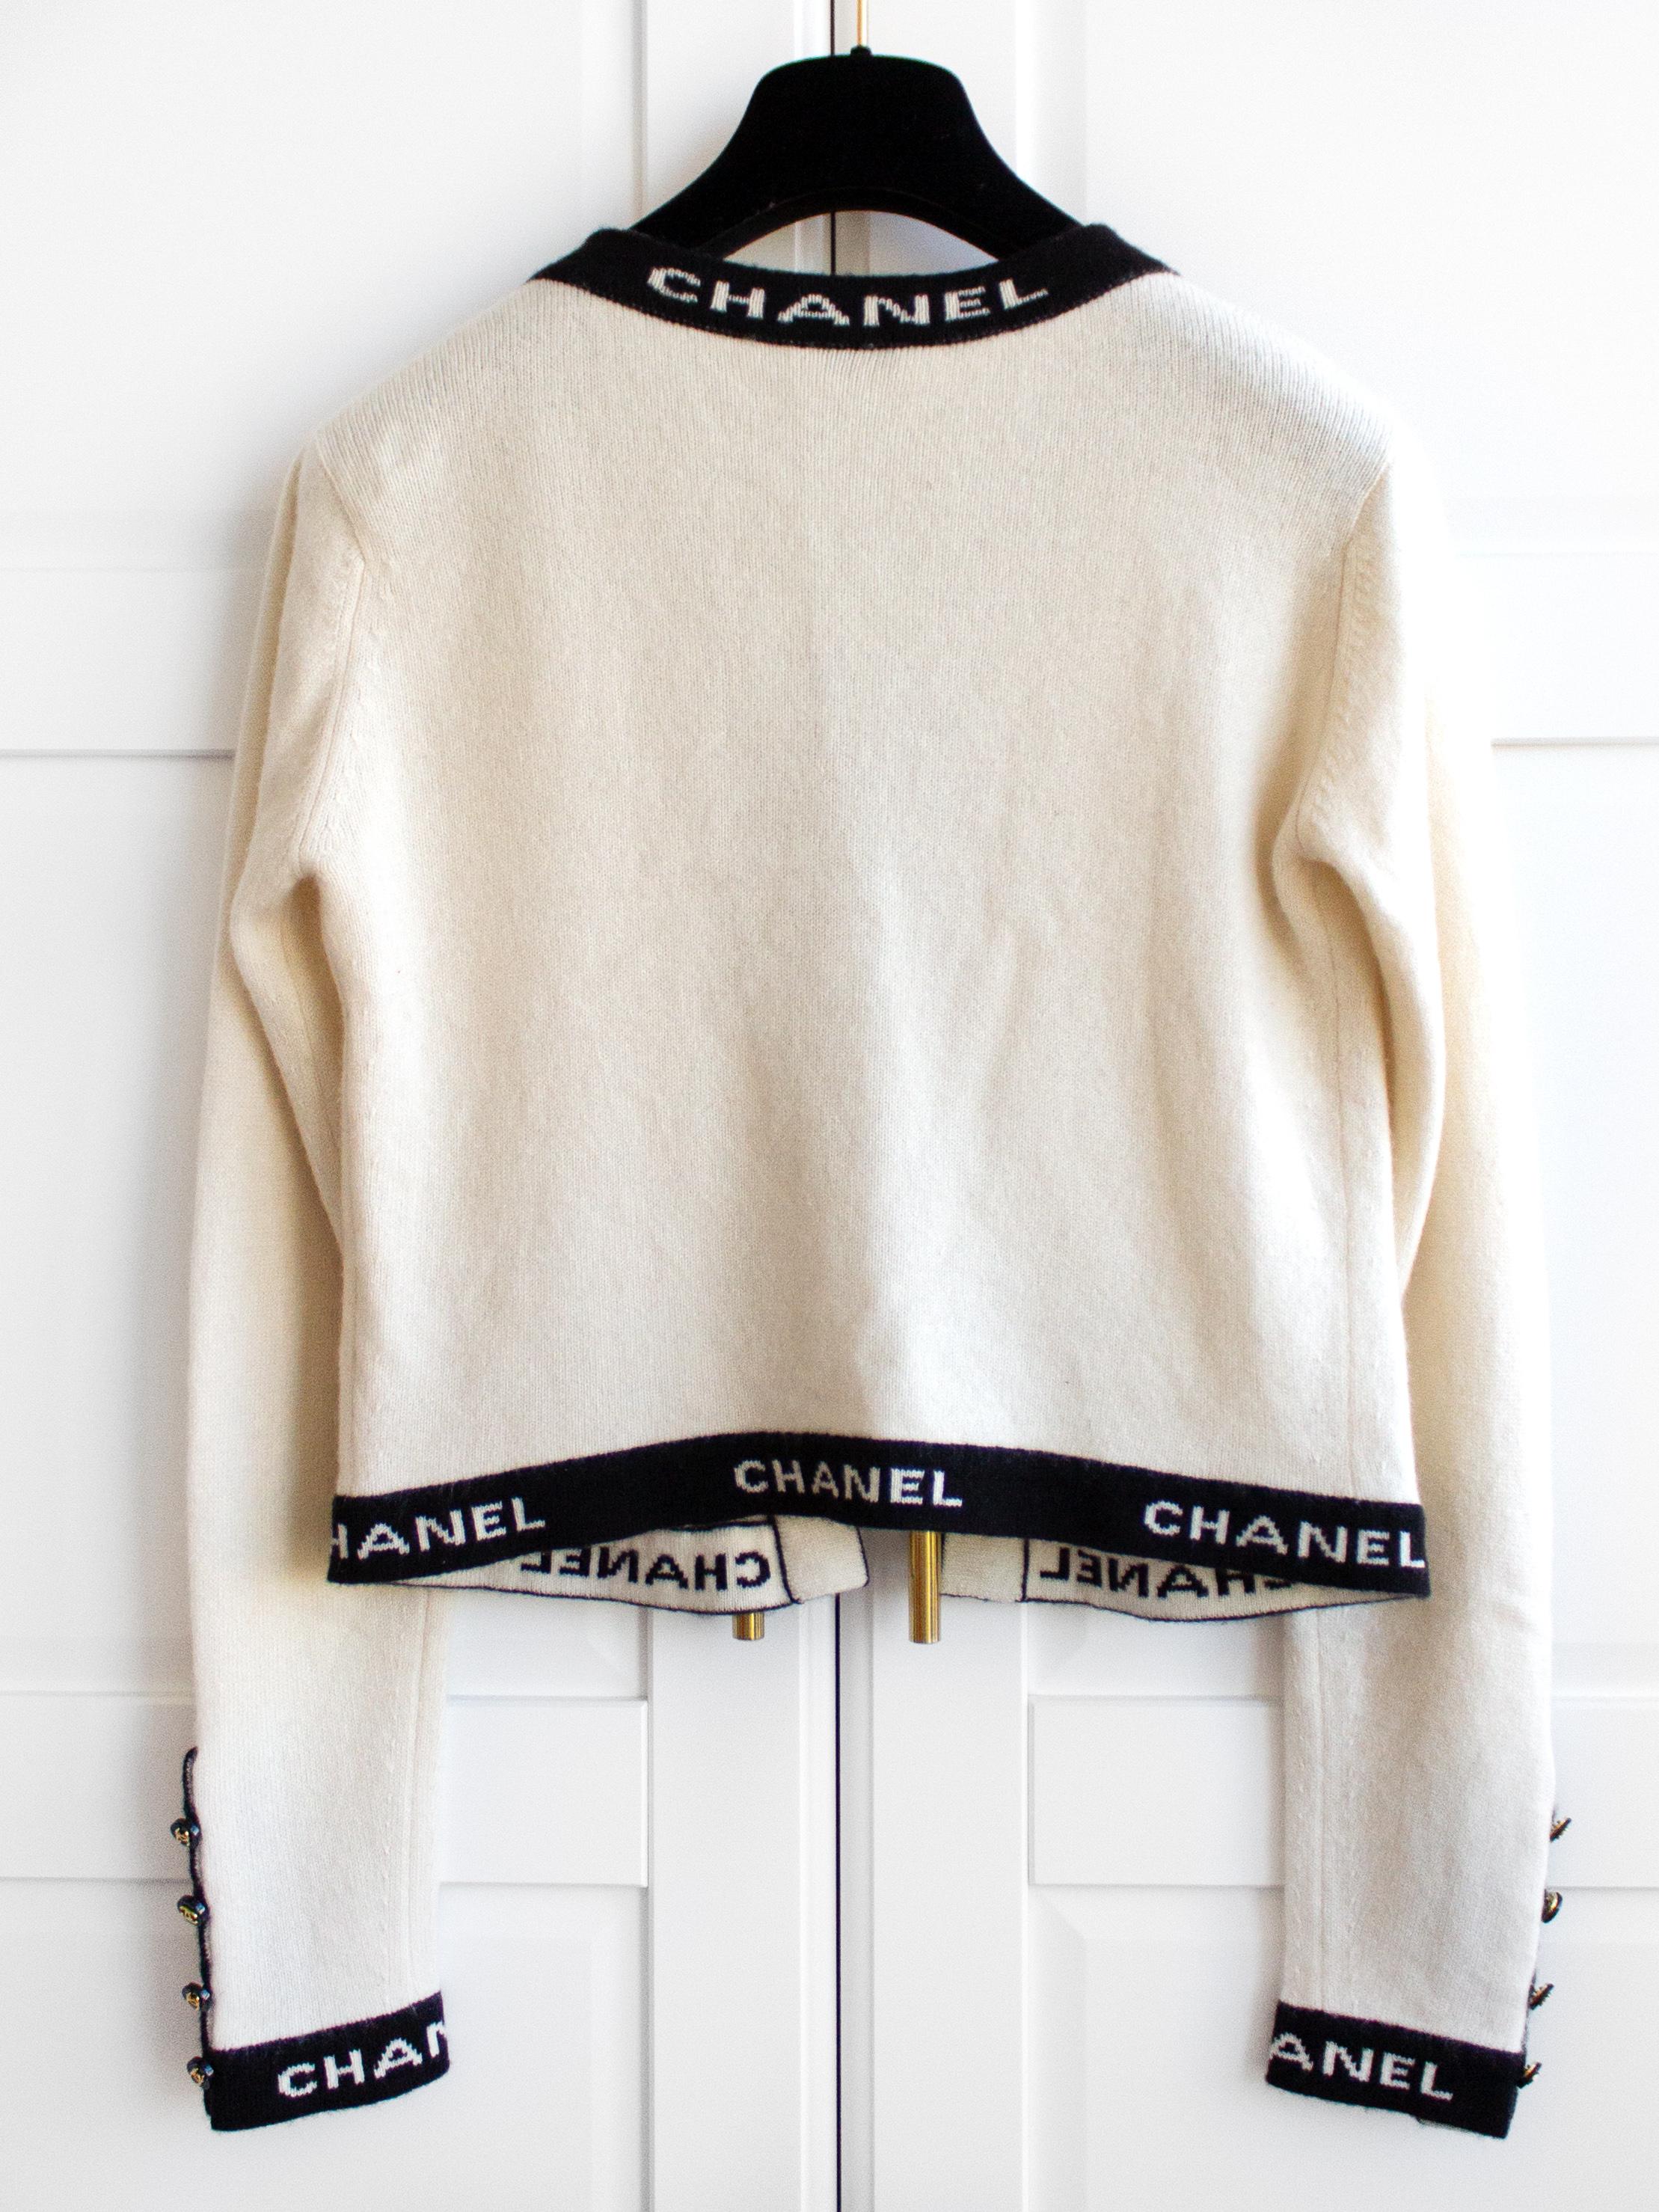 An iconic open-front cashmere cardigan from the 1995 Chanel Cruise Collection. Crafted in Coco Chanel's favorite contrasting colors of ivory white and black, this collector's item is adorned with the CHANEL logo on the edges and signature CC